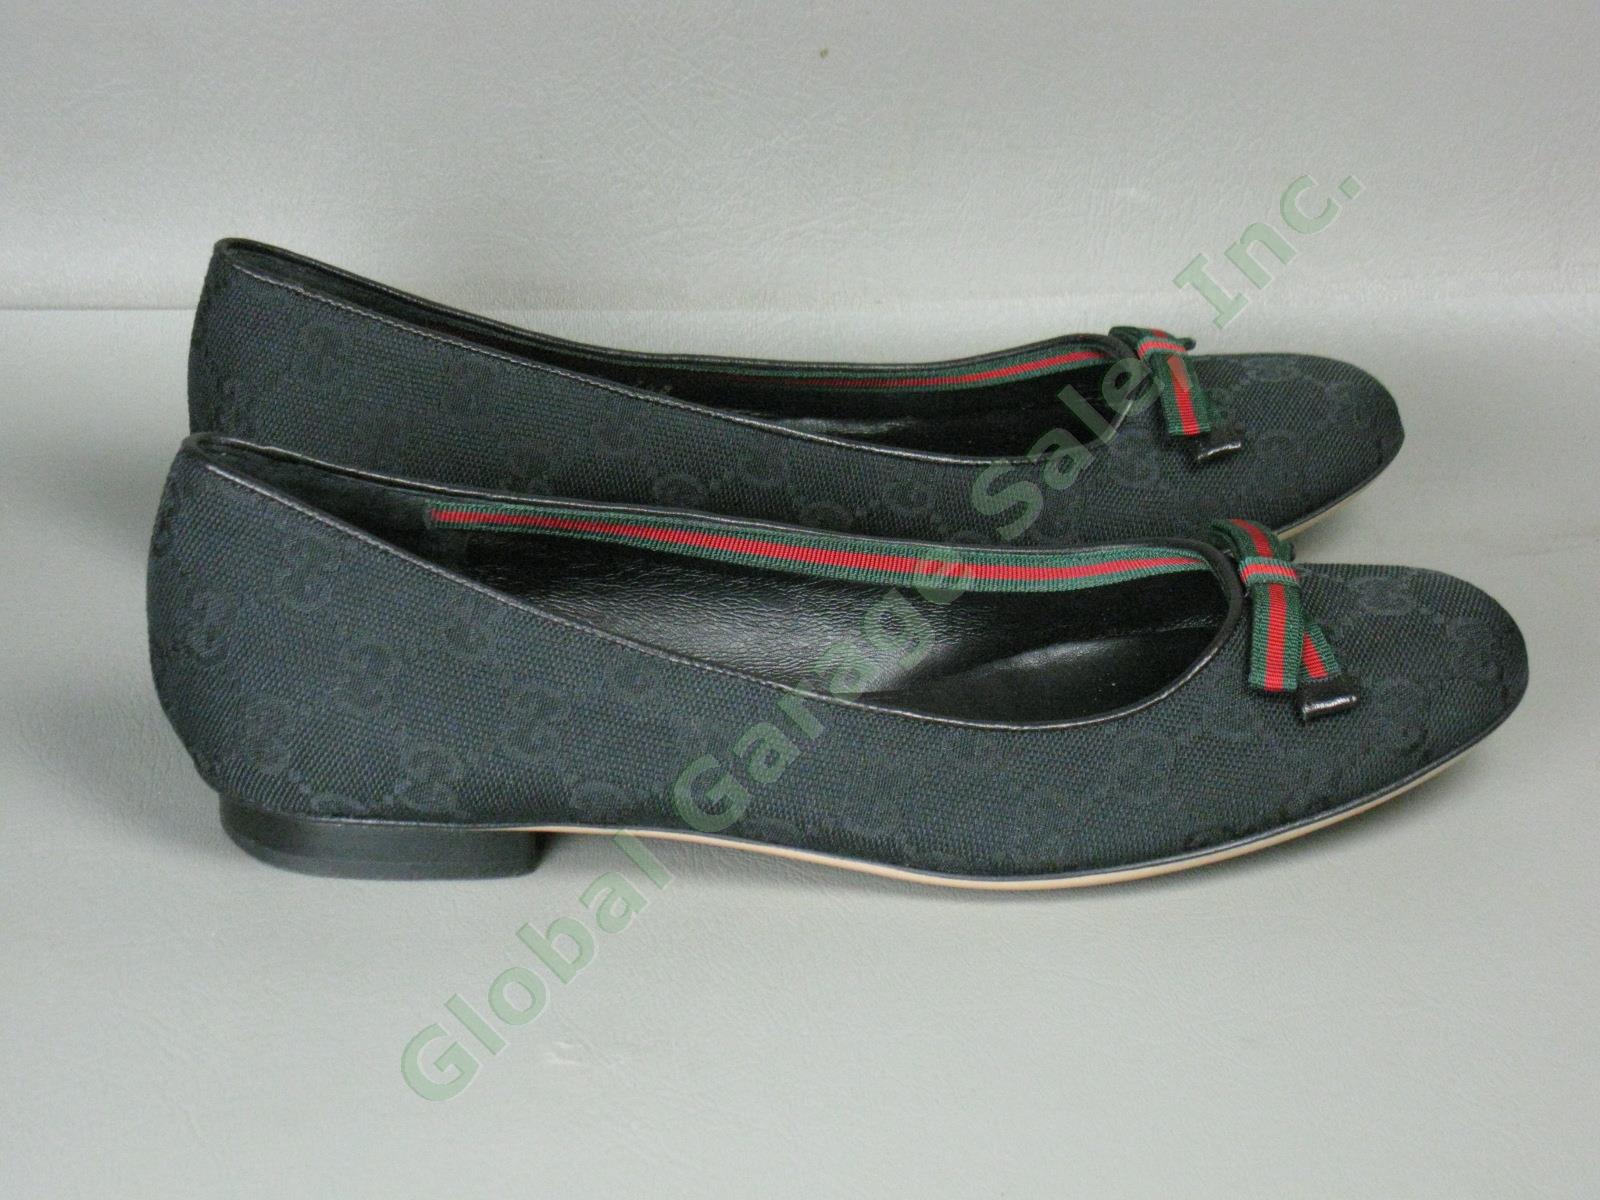 Womens Gucci Moca Tess S Cuoio Flats Size 7.5 Black One Owner With Box 161837 NR 6